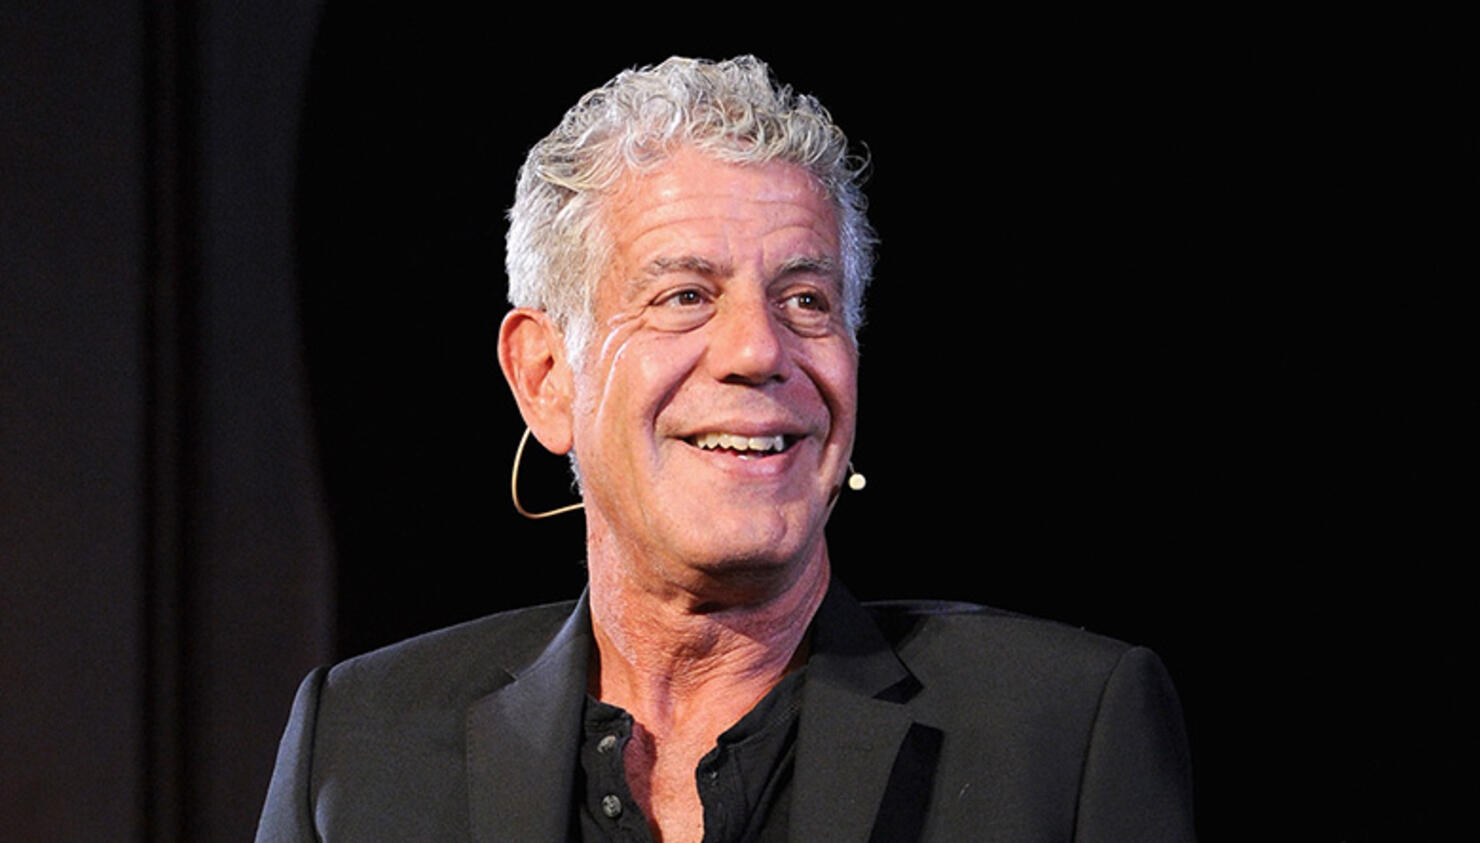 An Official Anthony Bourdain Food Trail May Be Coming to New Jersey